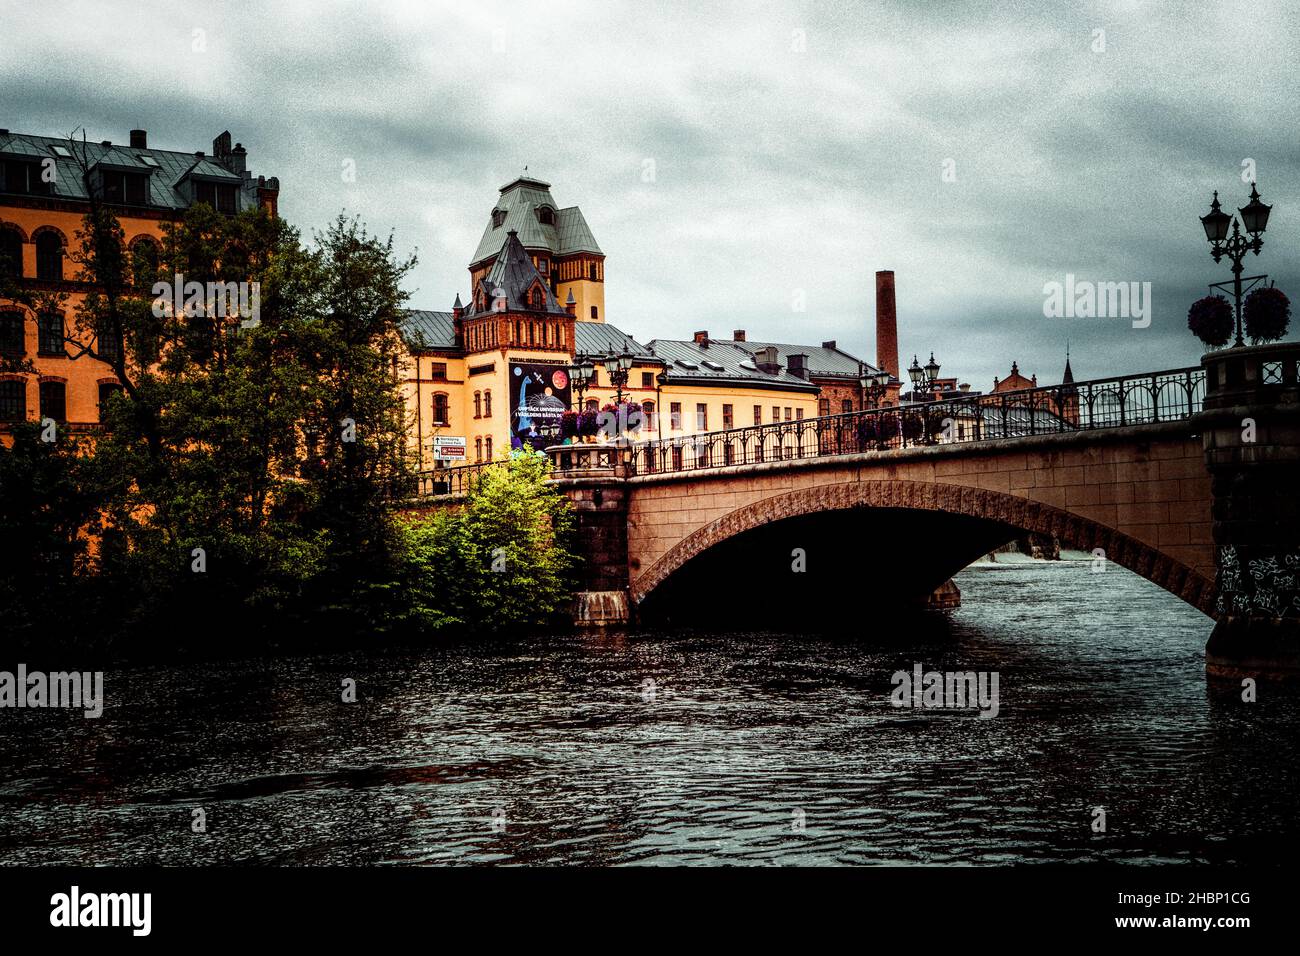 The old industrial district of Norrköping transformed into a cultural center Stock Photo